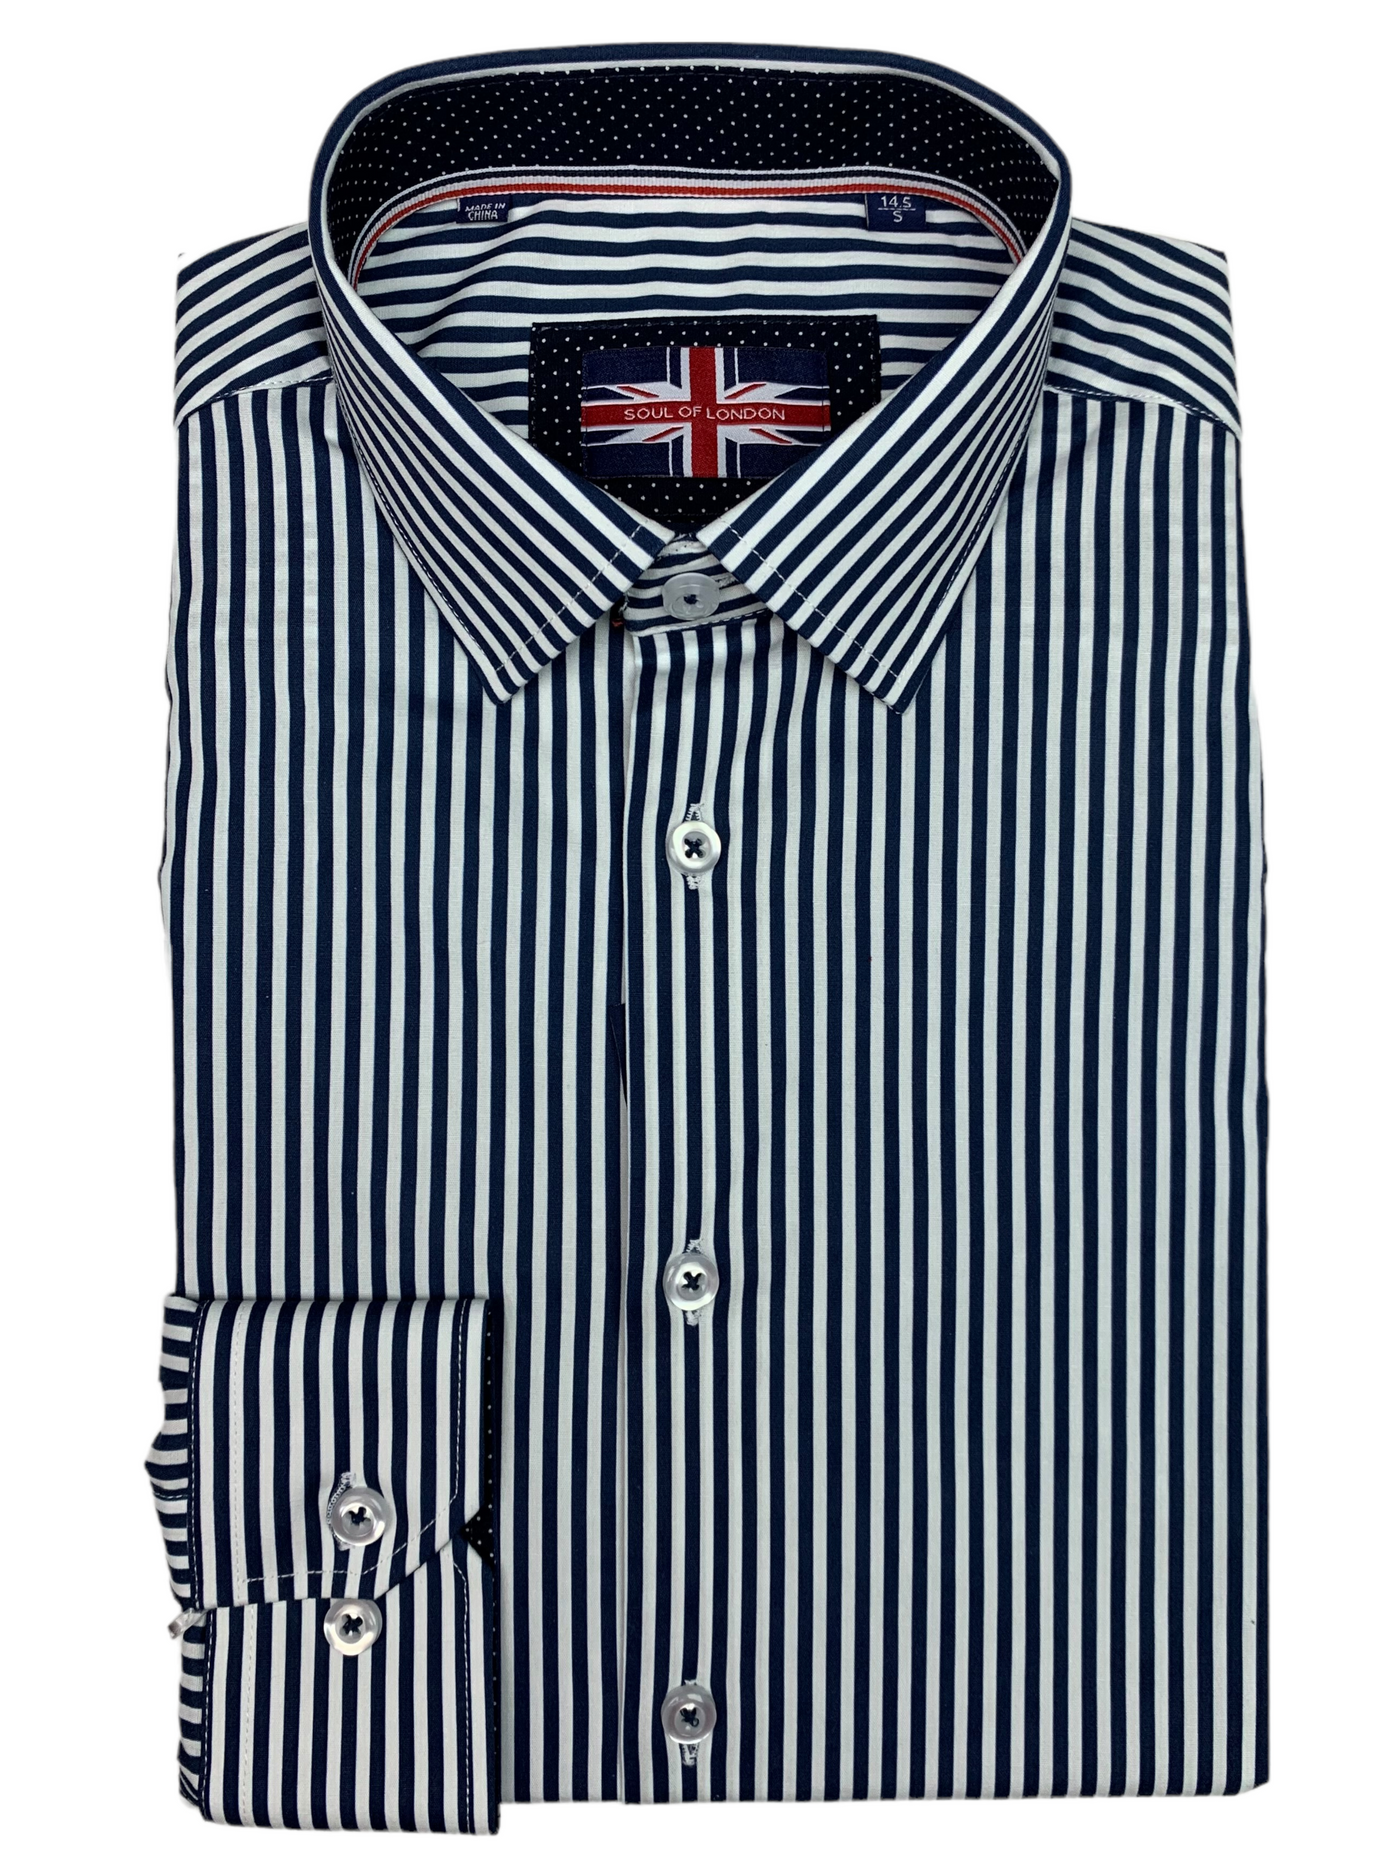 Chemise manches longues marine à rayures verticales